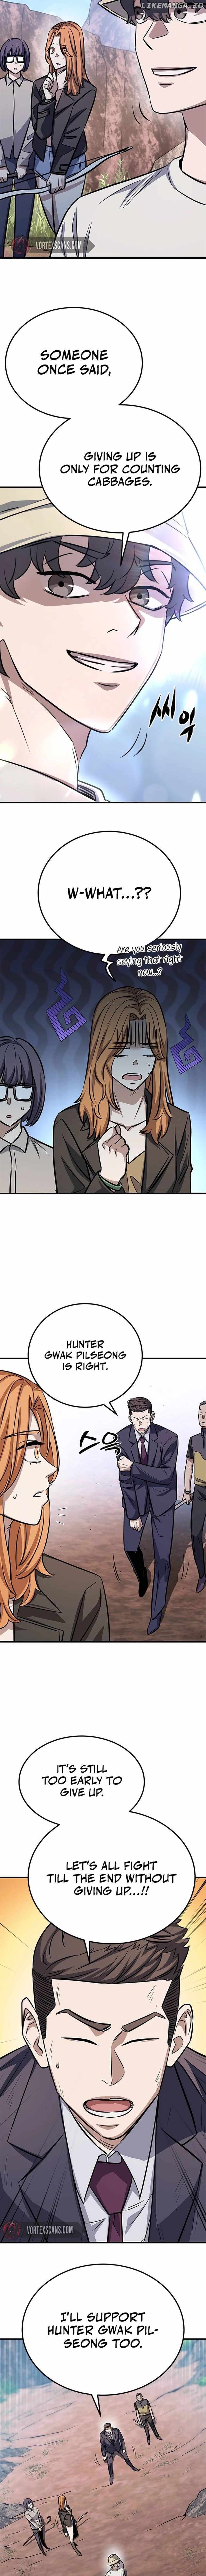 The legendary hunter becomes young again Chapter 8 - page 7